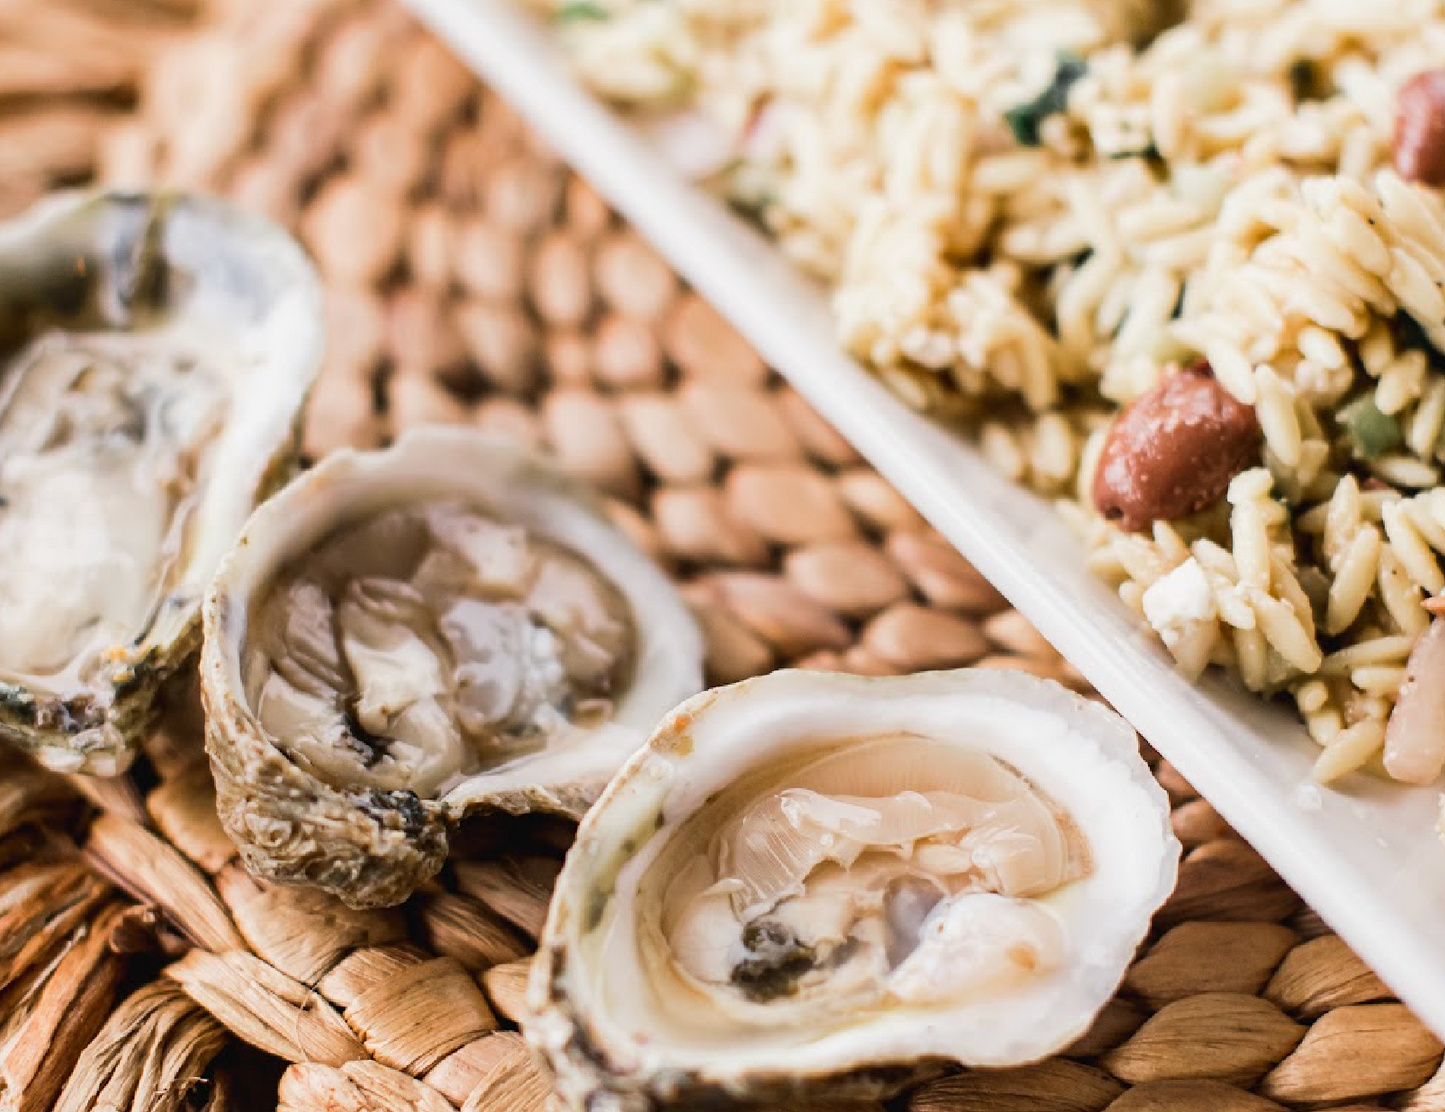 The 5 Best Pinterest Boards for Learning About Oysters